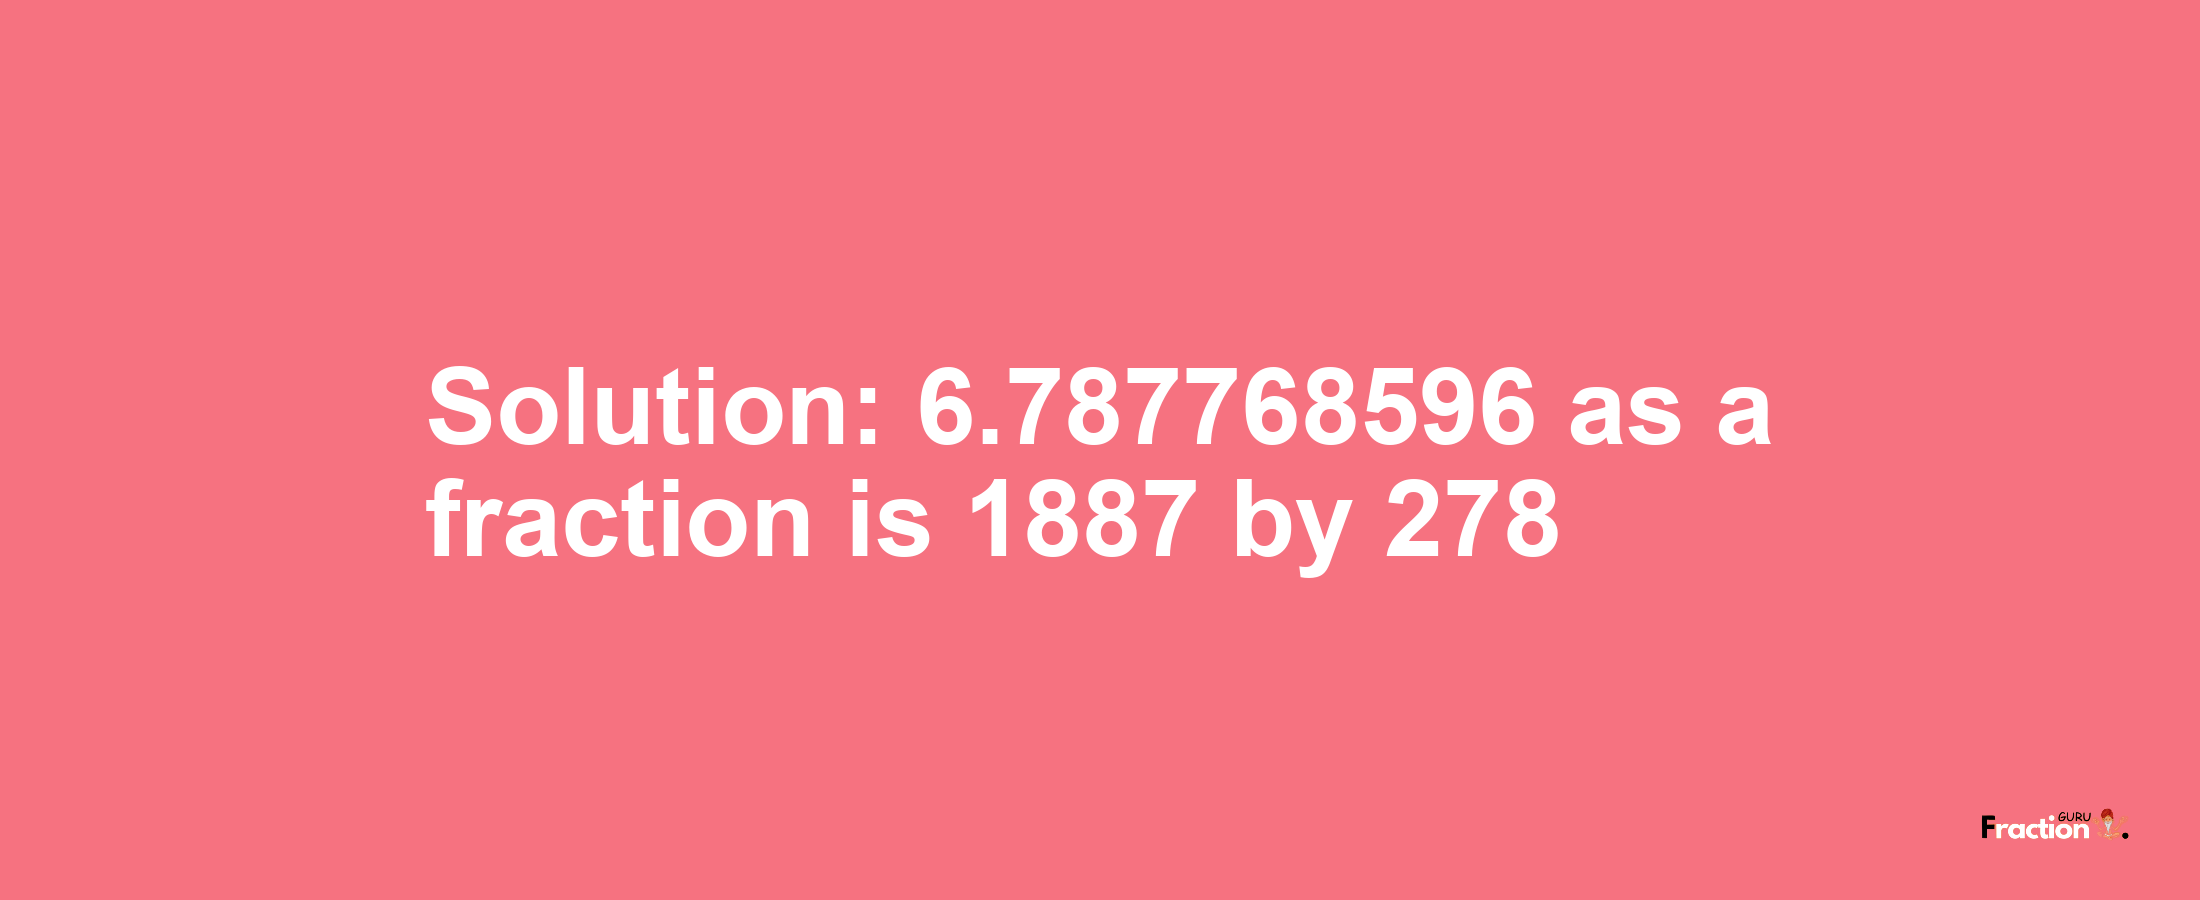 Solution:6.787768596 as a fraction is 1887/278